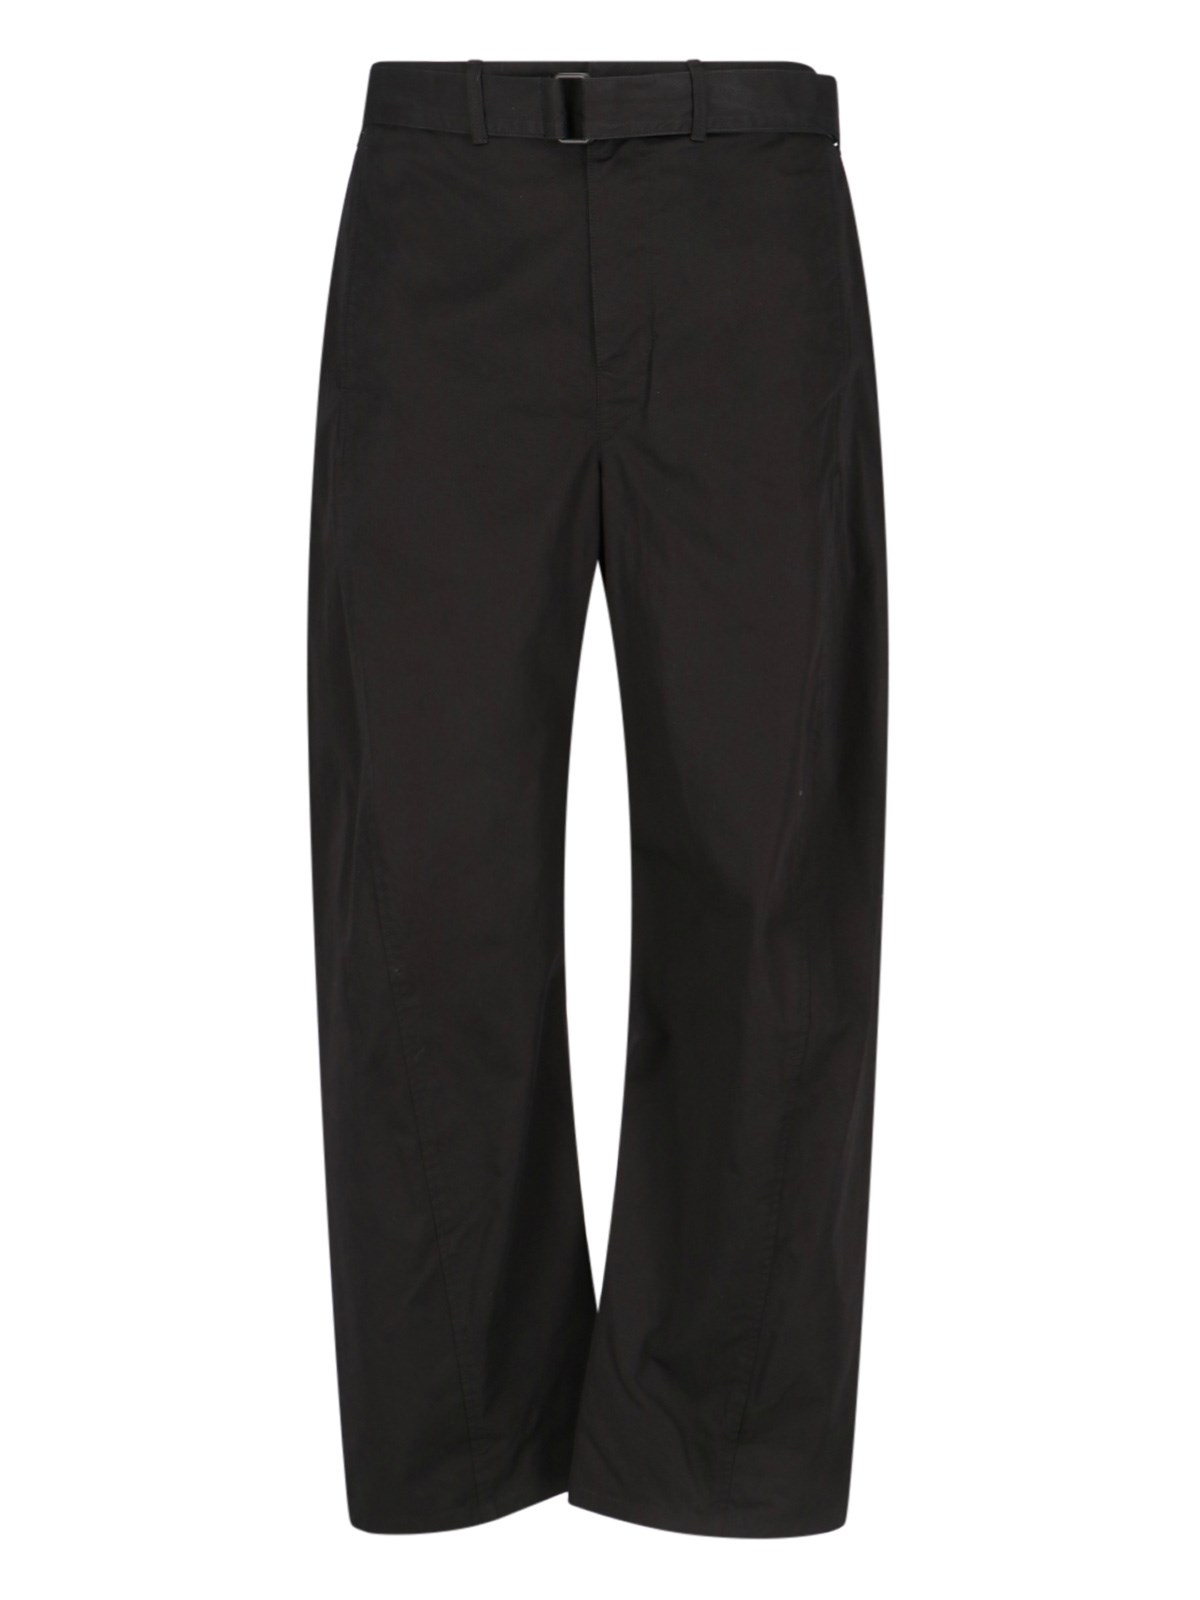 LEMAIRE 'TWISTED' PANTS